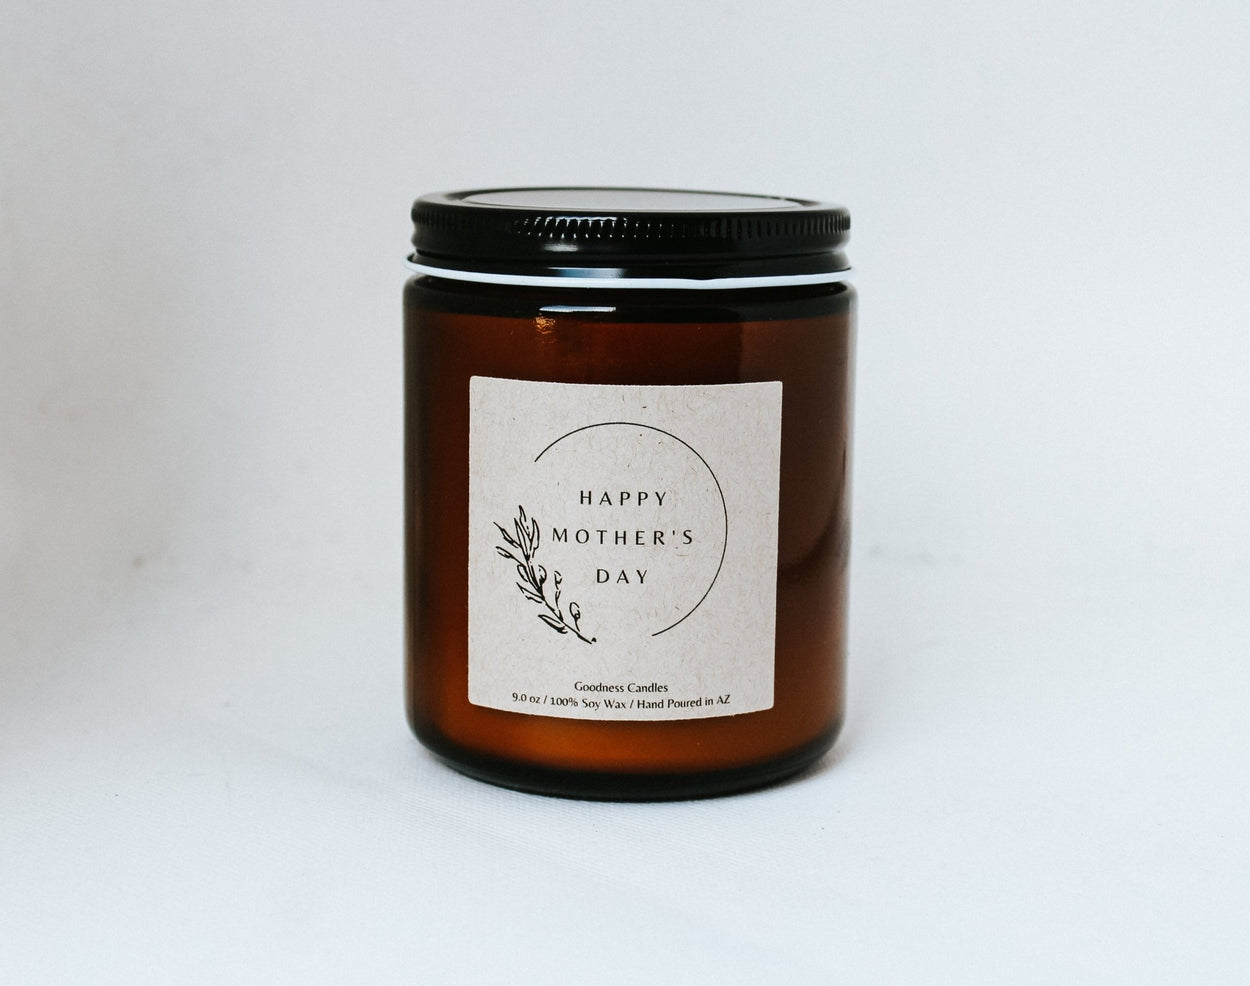 Happy Mother's Day Goodness Candles